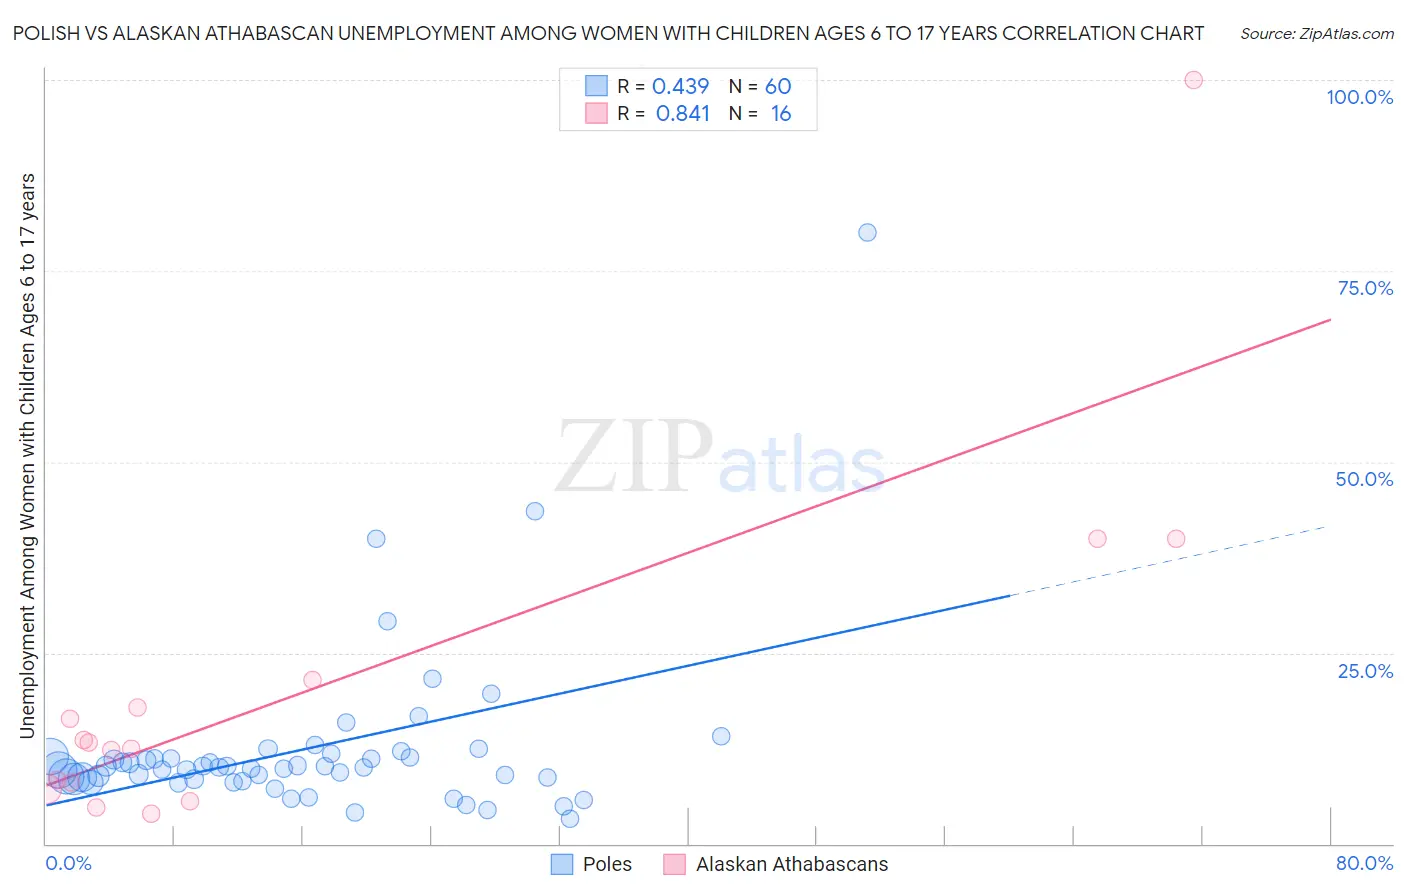 Polish vs Alaskan Athabascan Unemployment Among Women with Children Ages 6 to 17 years